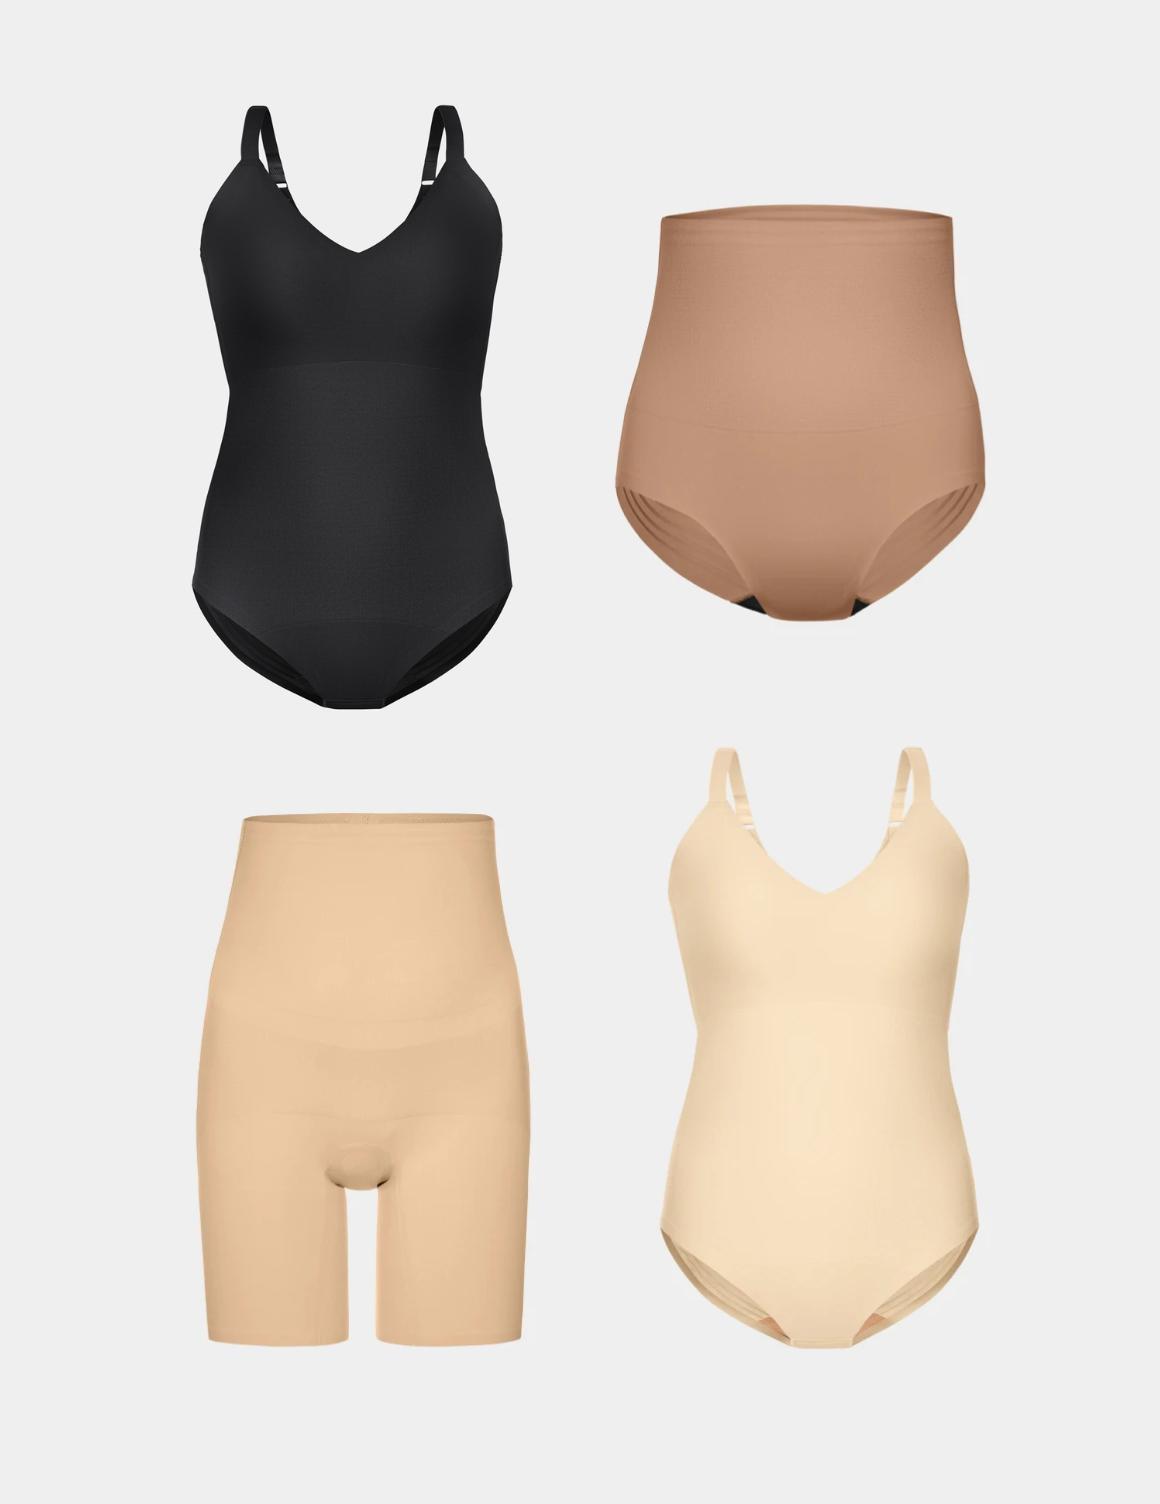 The Beginners Guide to Shapewear